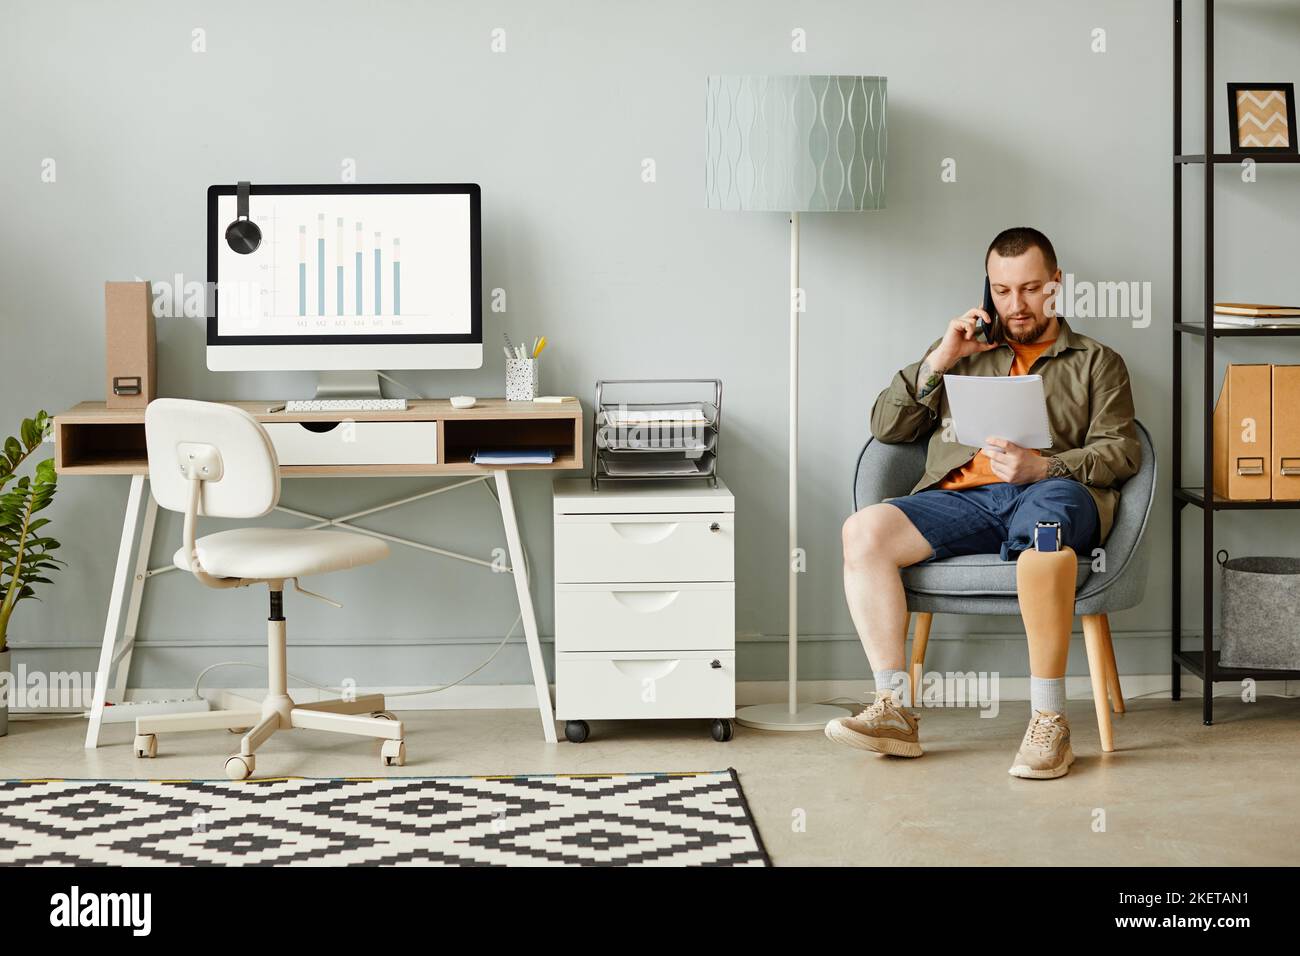 Full length portrait of man with prosthetic leg calling by phone while sitting in chair in home office interior, copy space Stock Photo